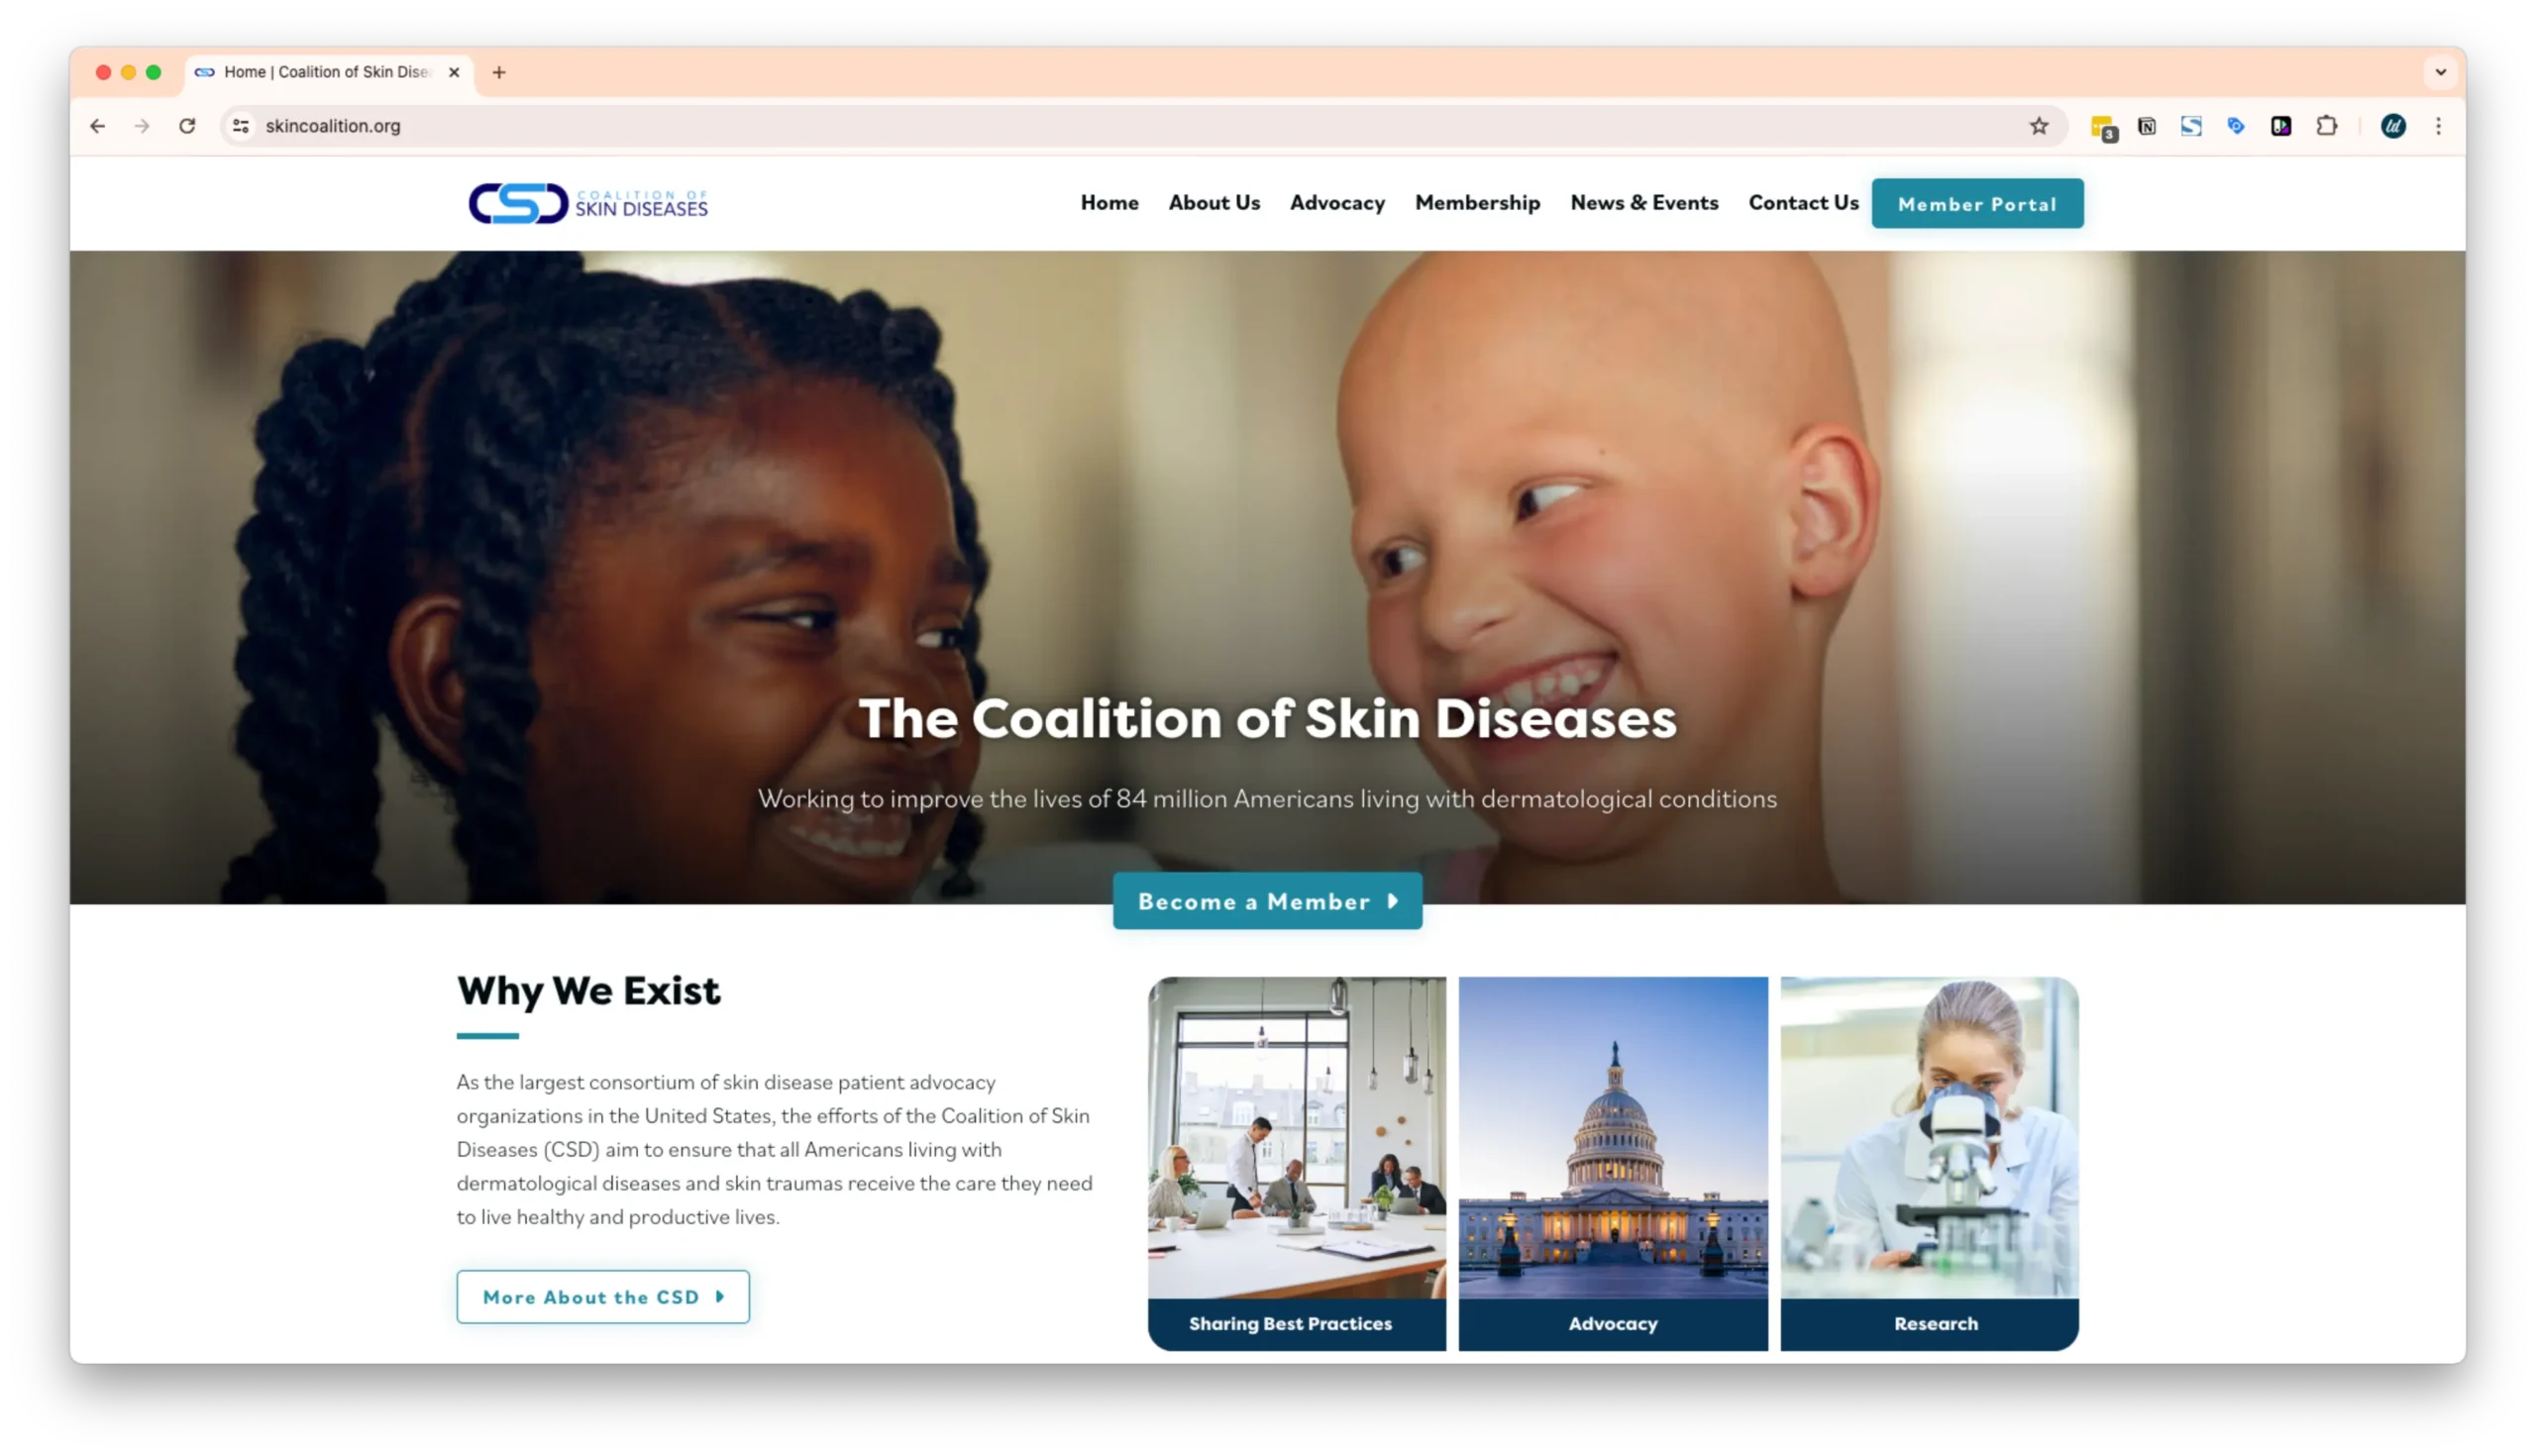 A homepage for the Coalition of Skin Diseases, featuring a banner image of two smiling children, one with braided hair and the other bald. Below are sections on the organization’s mission, including sharing best practices, advocacy, and research.